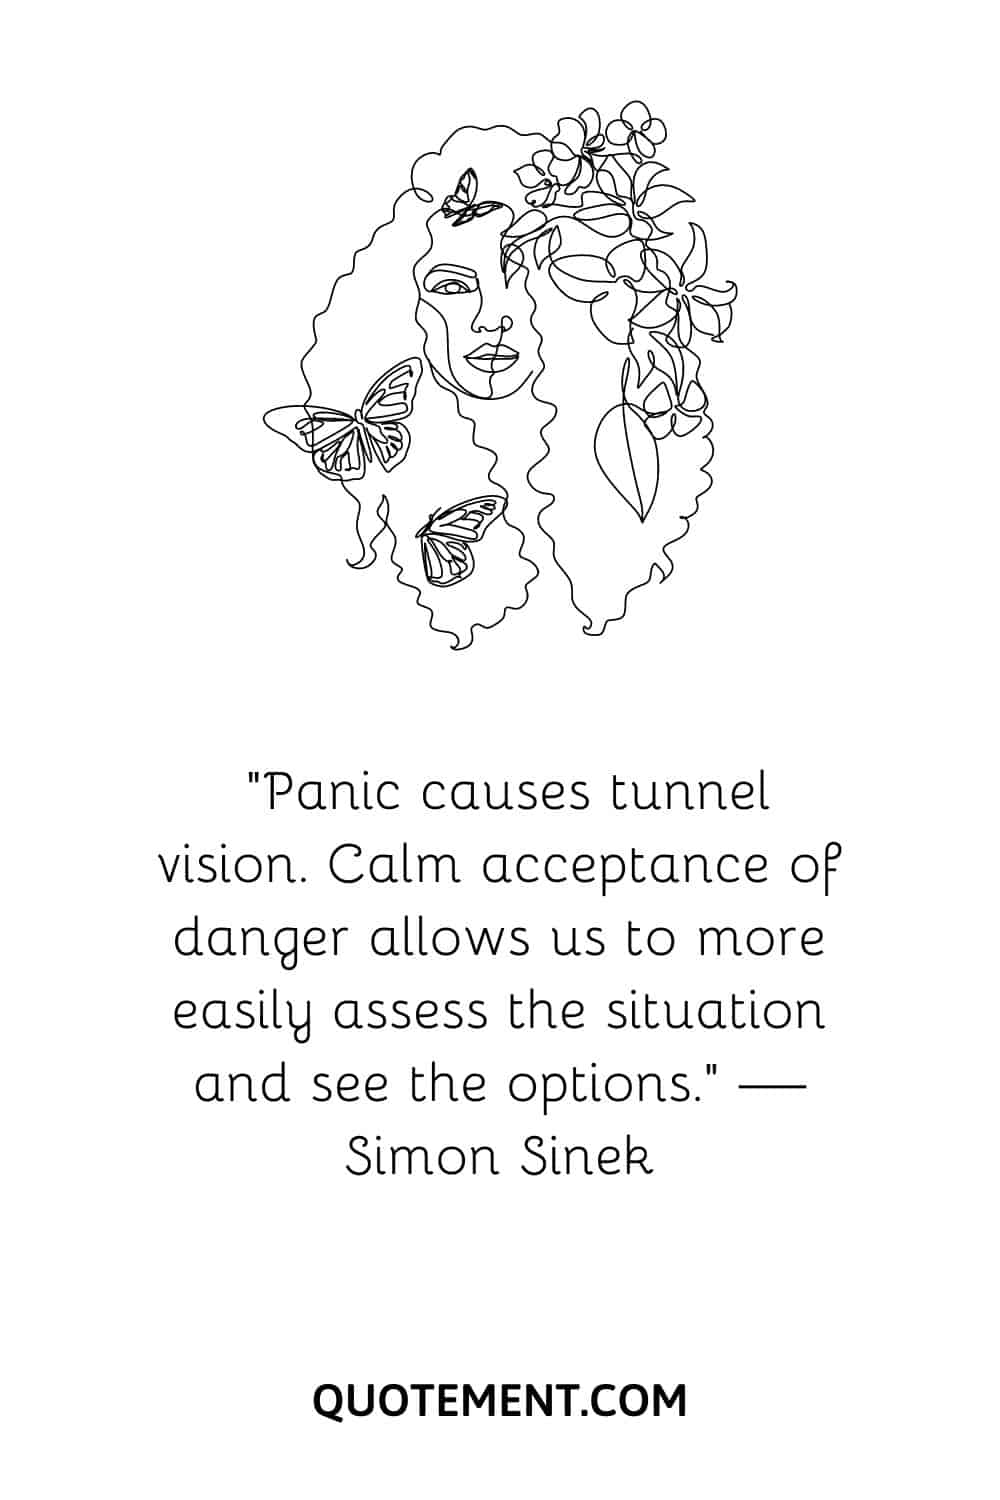 “Panic causes tunnel vision. Calm acceptance of danger allows us to more easily assess the situation and see the options.” — Simon Sinek